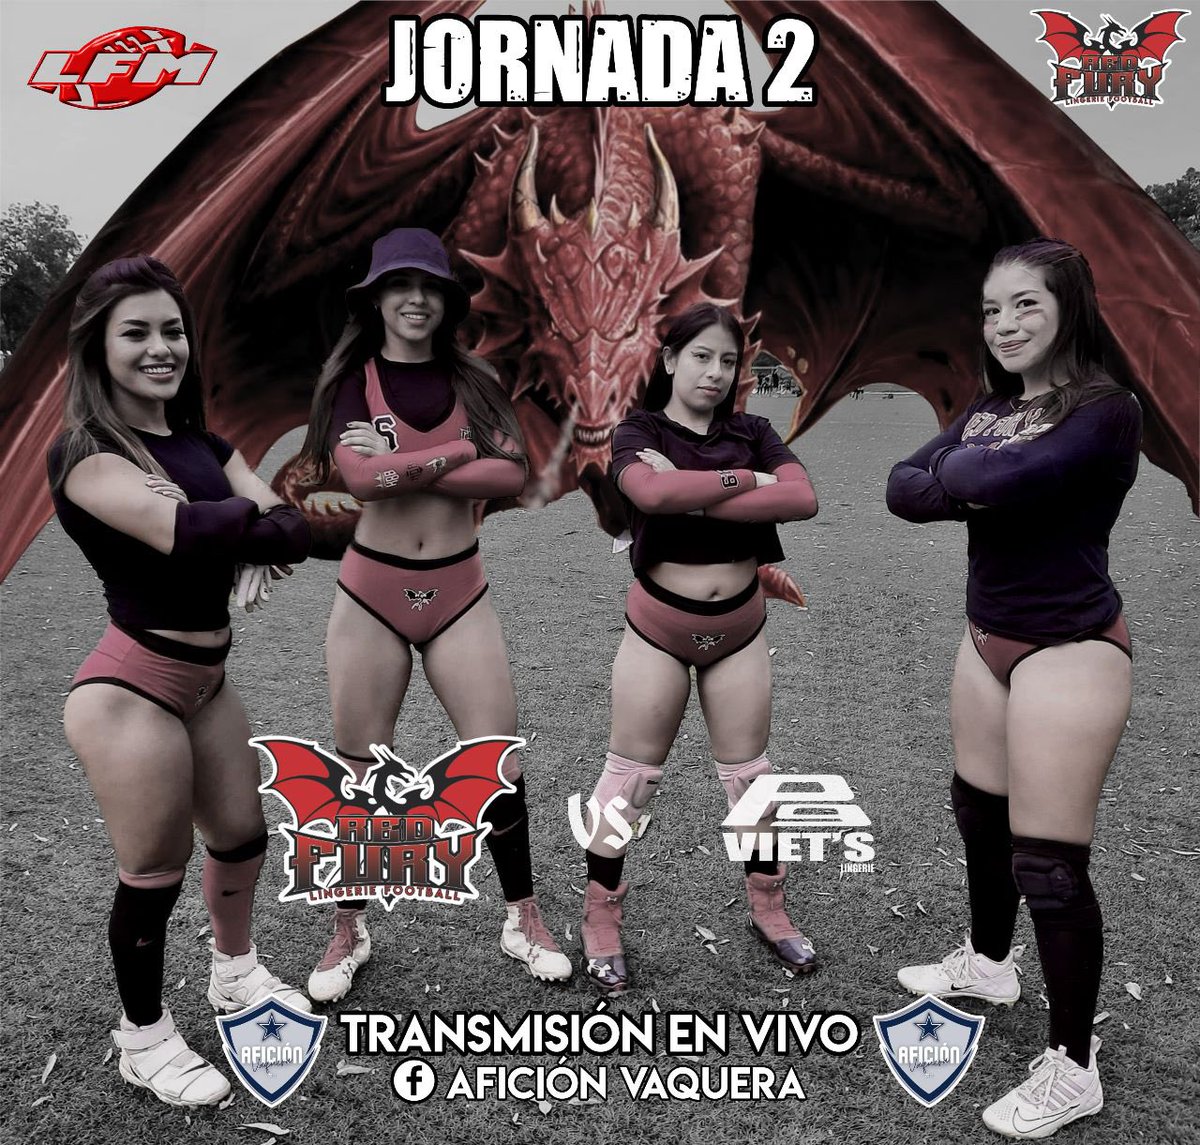 #LFM Week 2 Tomorrow at 3pm! If you can't make it out to the game, you can watch it via live stream on the #AficionVaquera FB page. 

#RedFuryReloaded #unleashthefury #football #bikinifootball #sexy #cdmx #mexico #ffz #lingeriefootball #nojokefootball #likeagirl #ligalfm